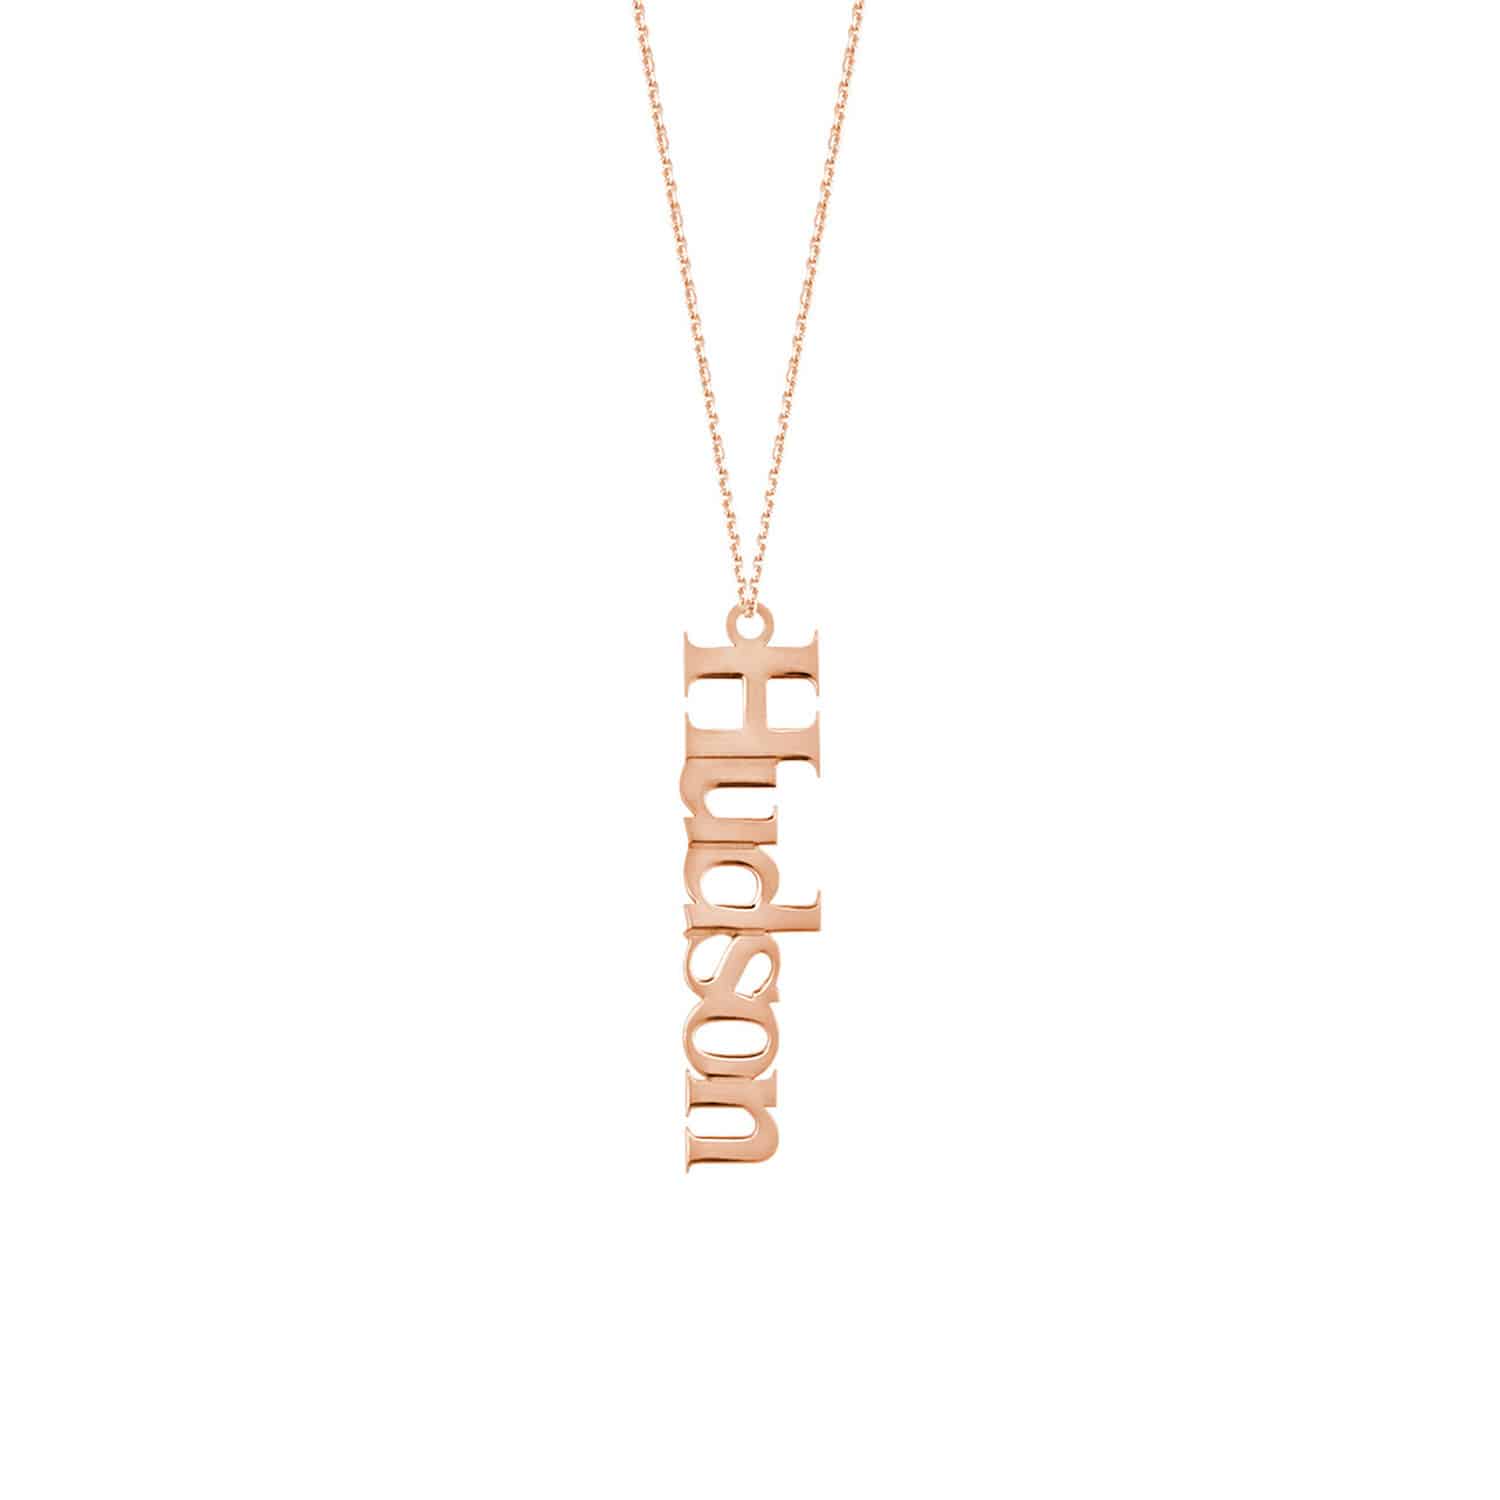 Customizable 14K Gold Yellow White Rose Vertical Nameplate Pendant Necklace - Rose Gold, 16"-18" Adjustable